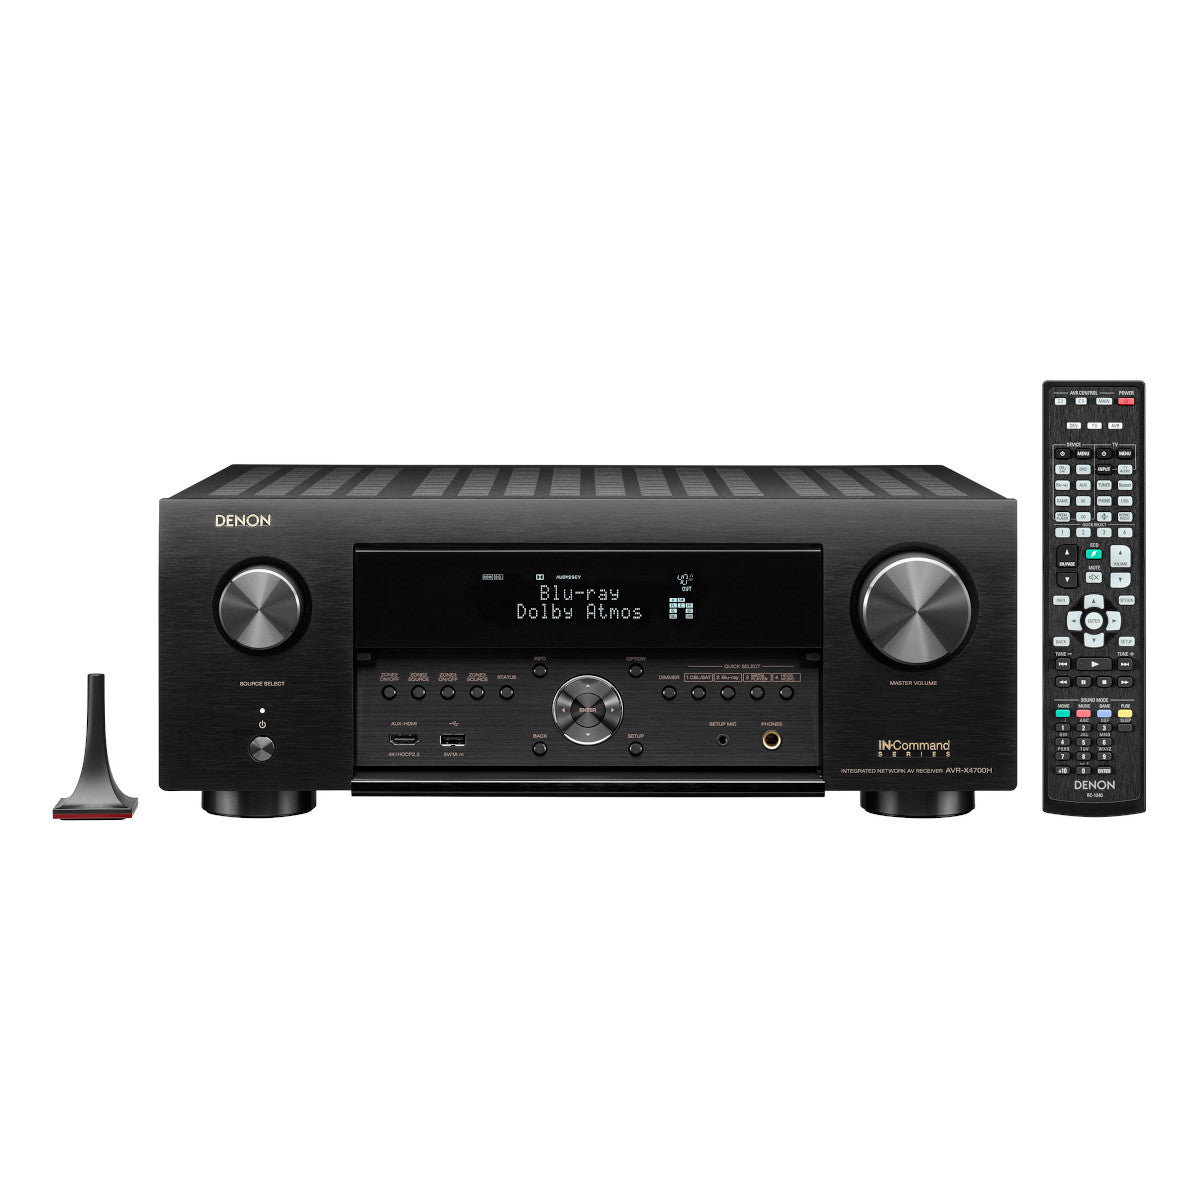 Denon AVR-X4700H 9.2-Channel 8K AV Receiver with 3D Audio and Amazon Alexa Voice Control (Factory Certified Refurbished)